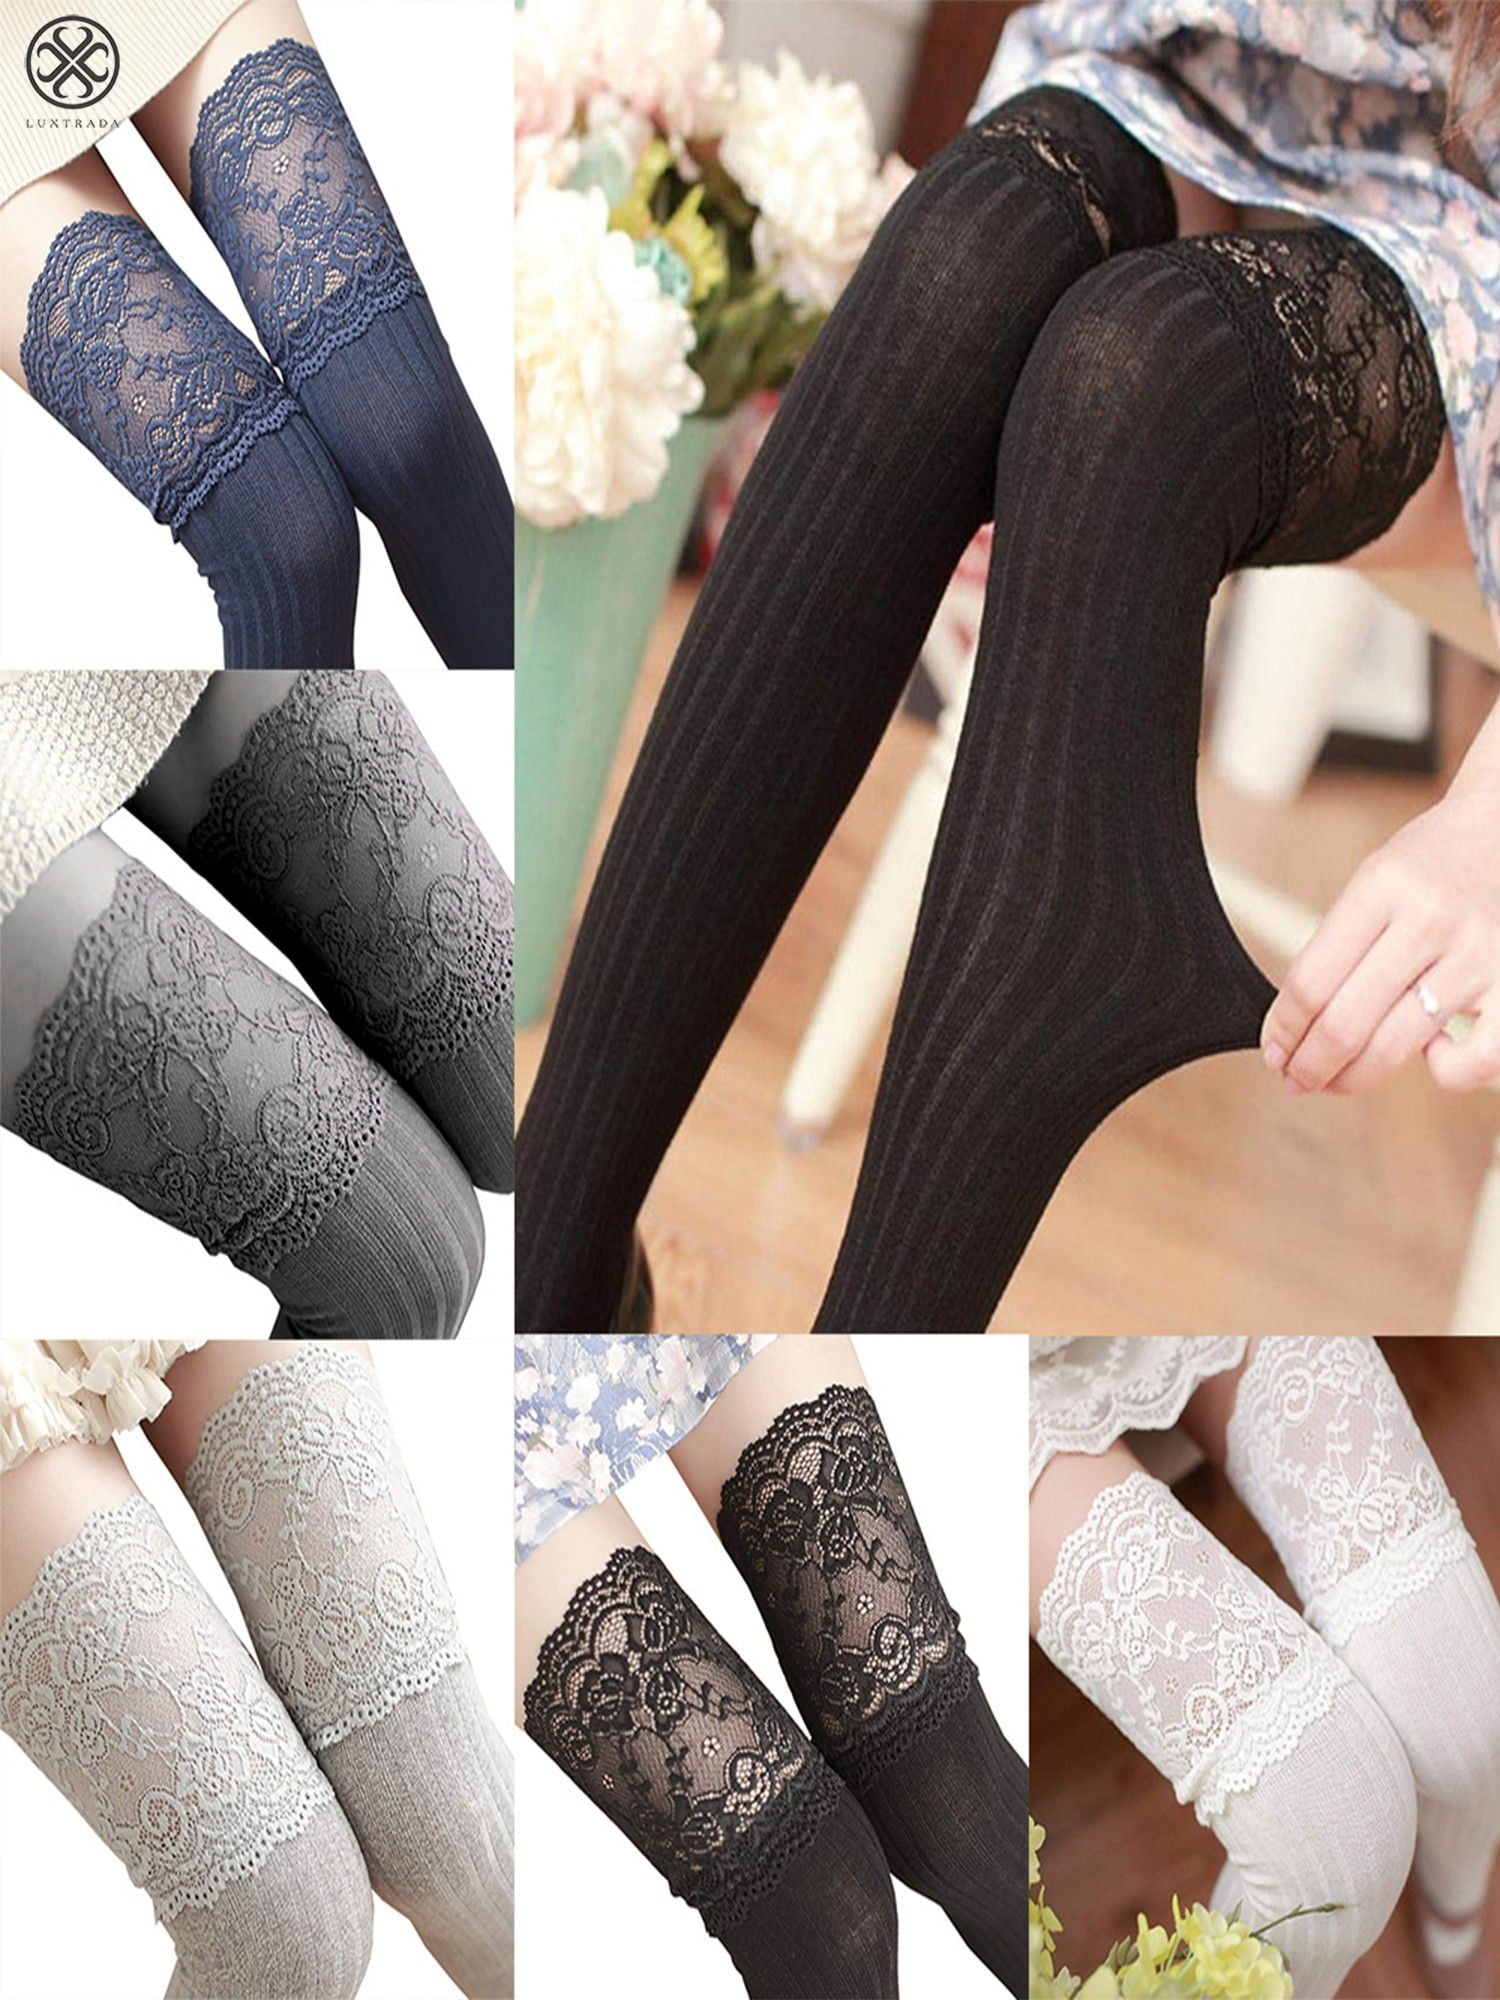 Luxtrada Luxtrada Women Lace Trim Thigh High Over The Knee Socks Long Cotton Solid Color